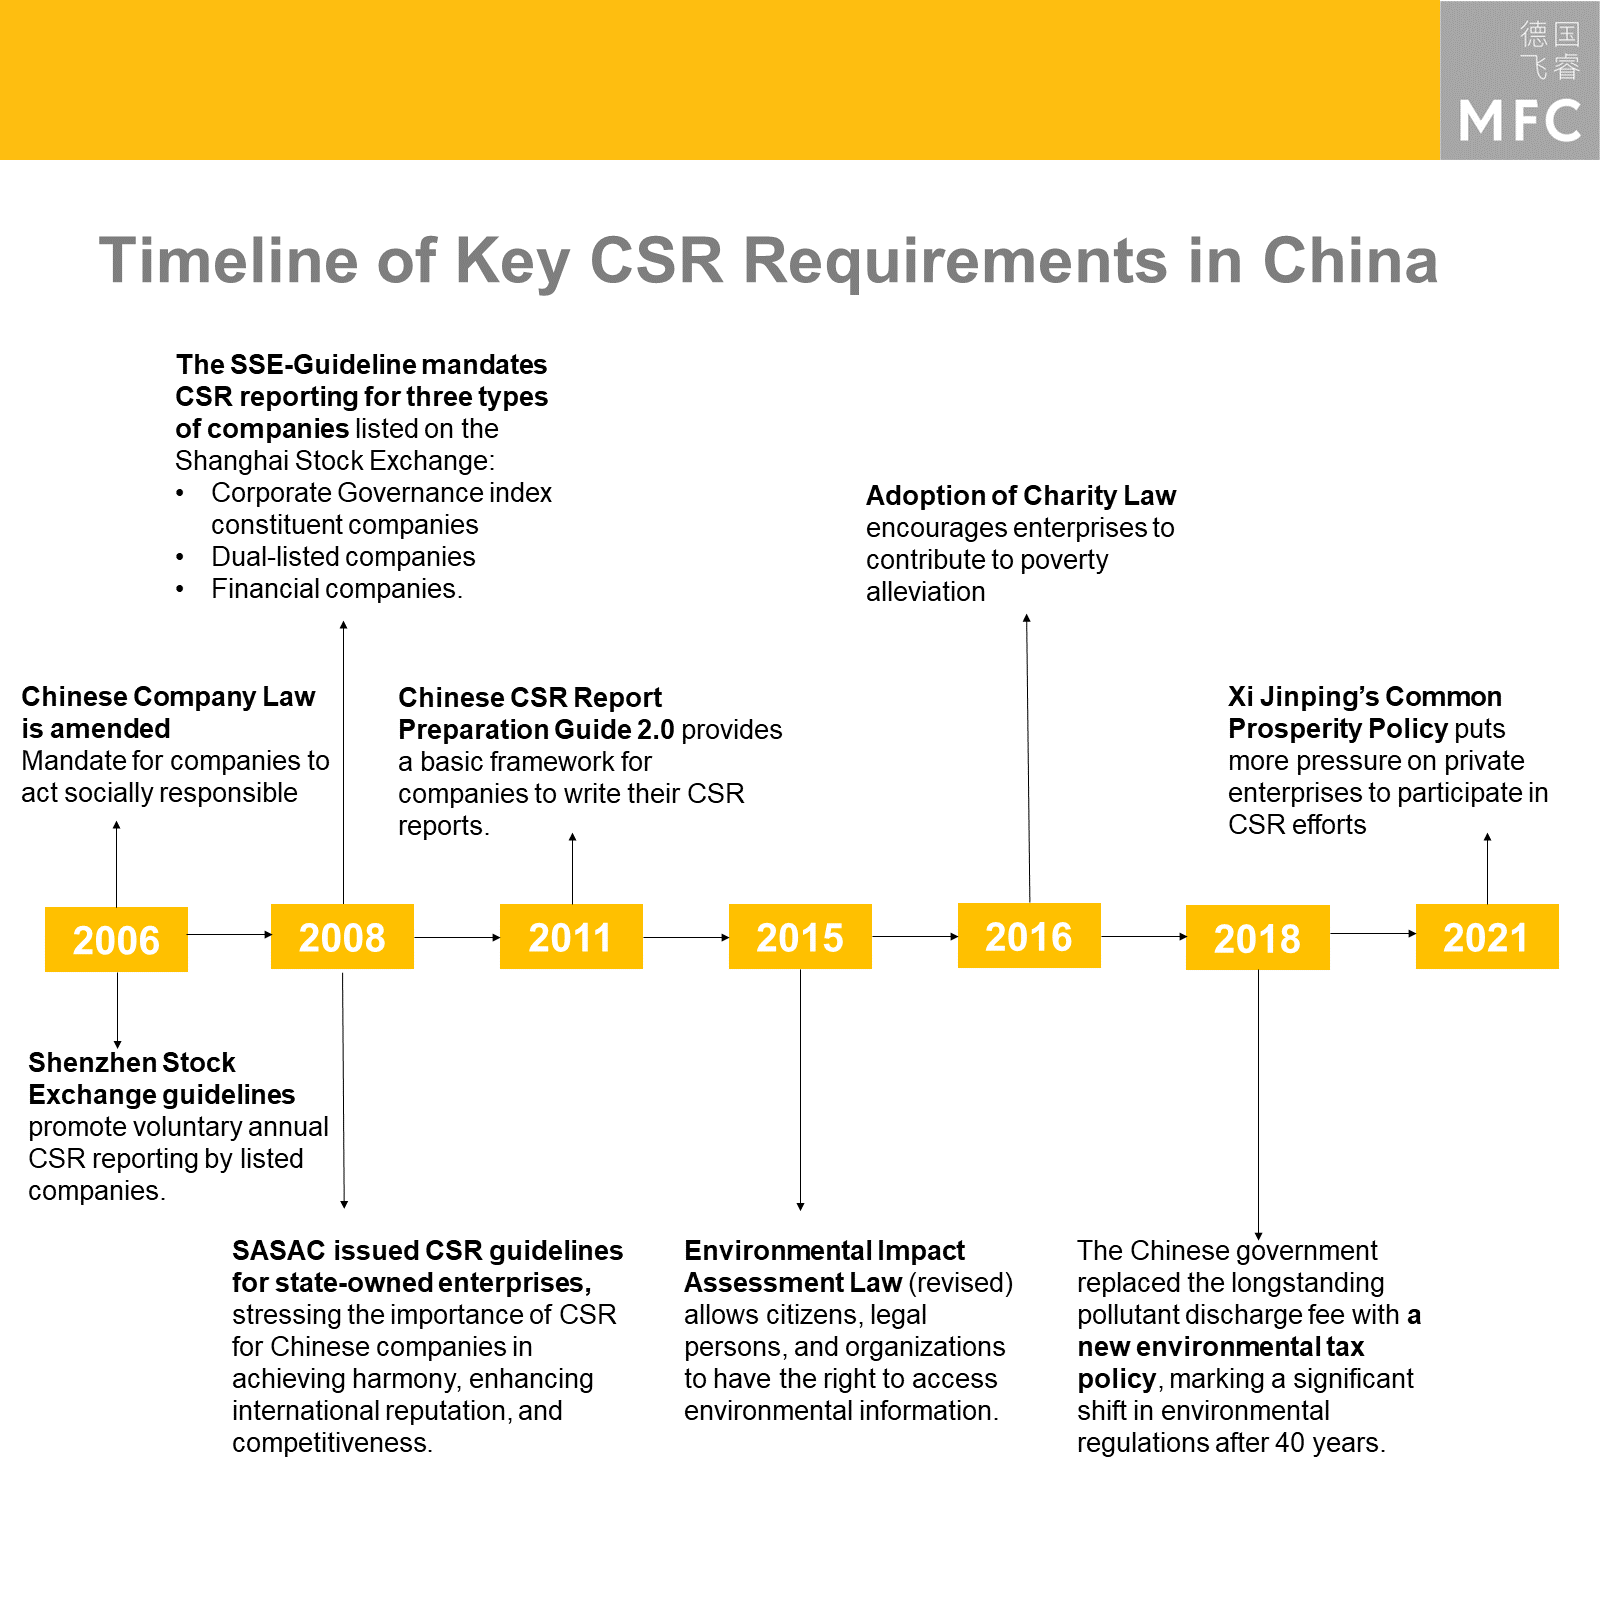 Timeline of CSR in China: CSR practices have been evolving since 2006.